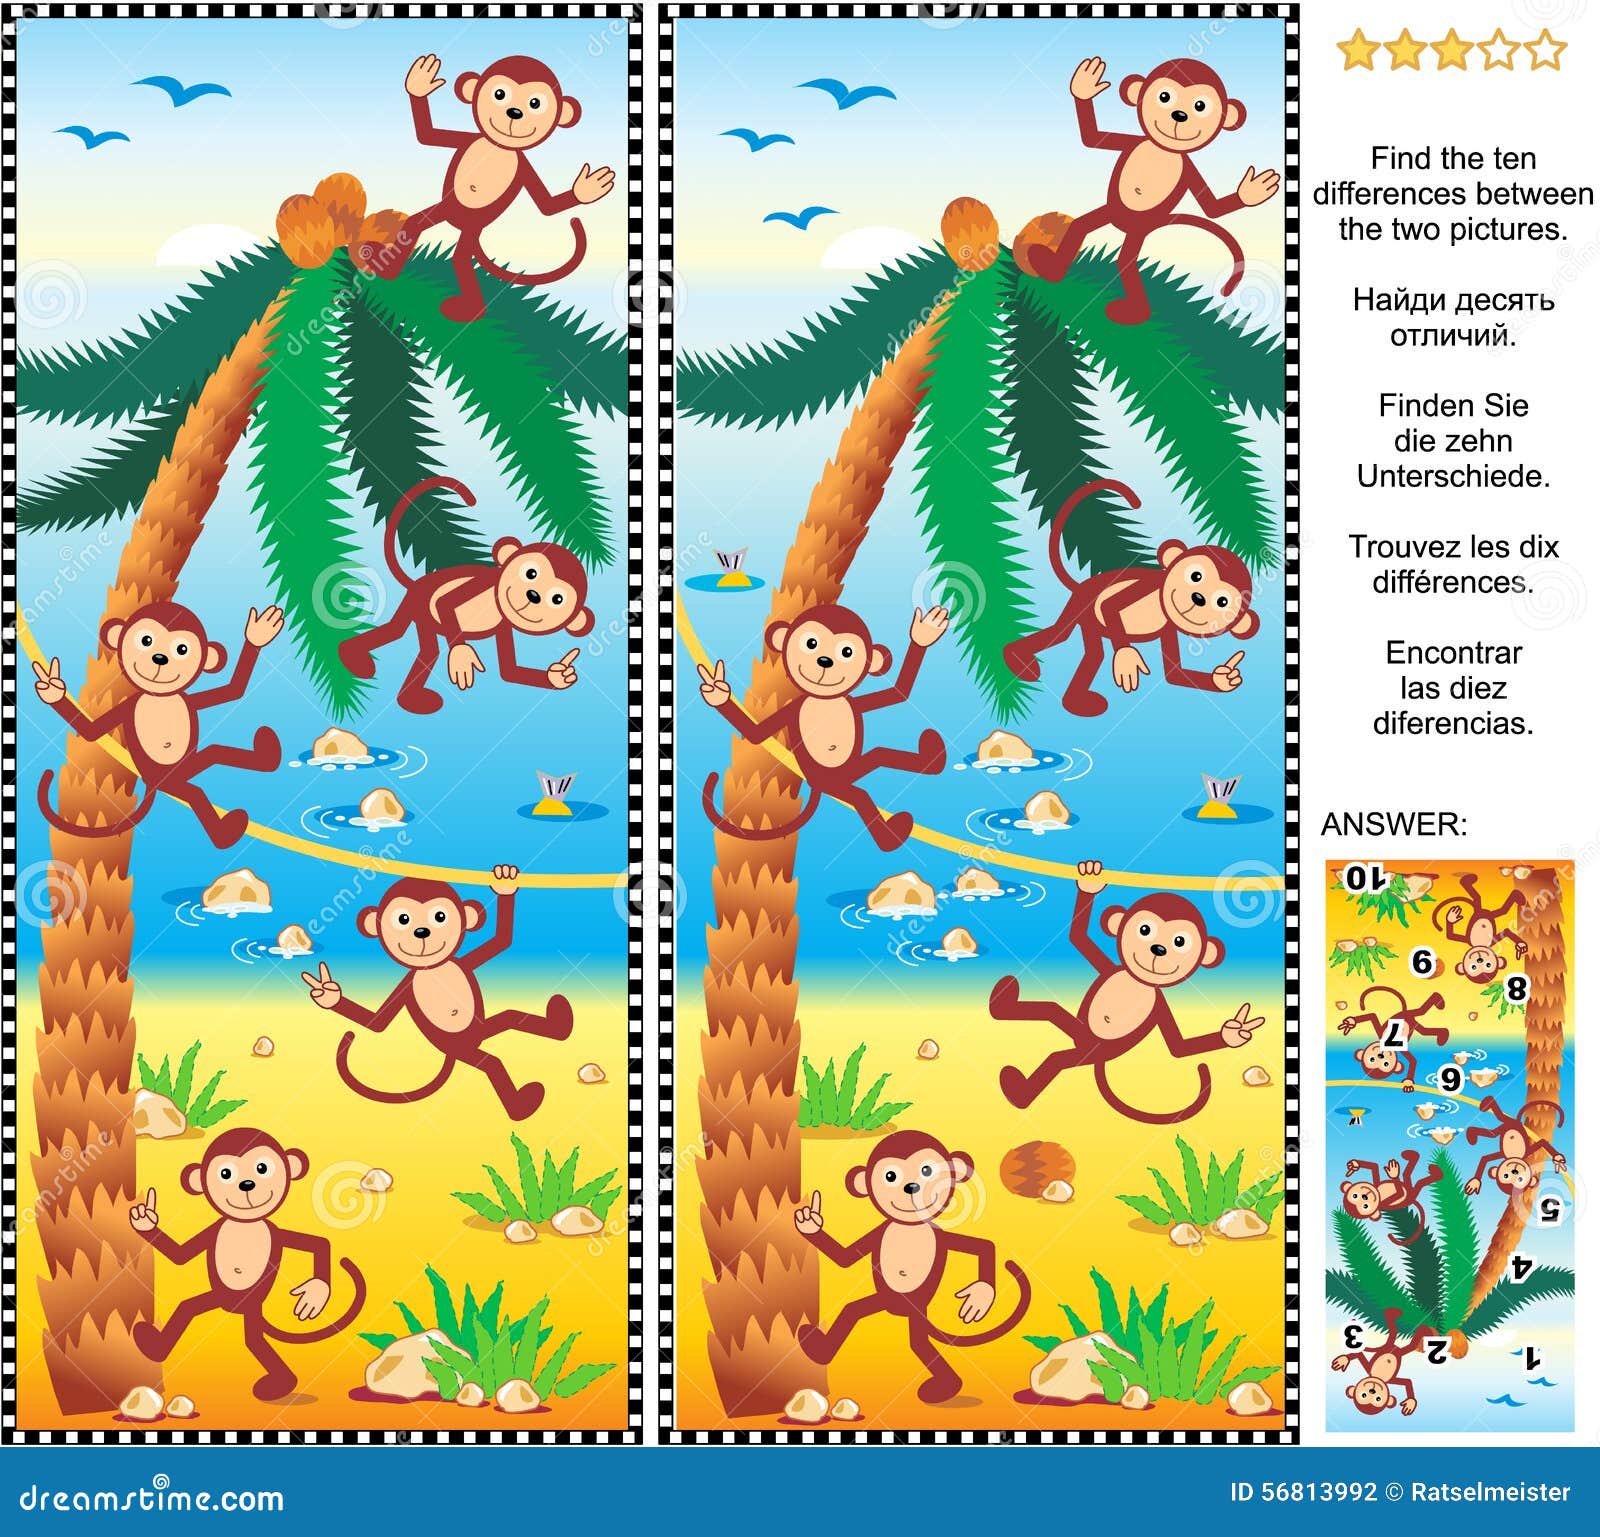 find the differences picture puzzle - monkeys, beach, coconut palm